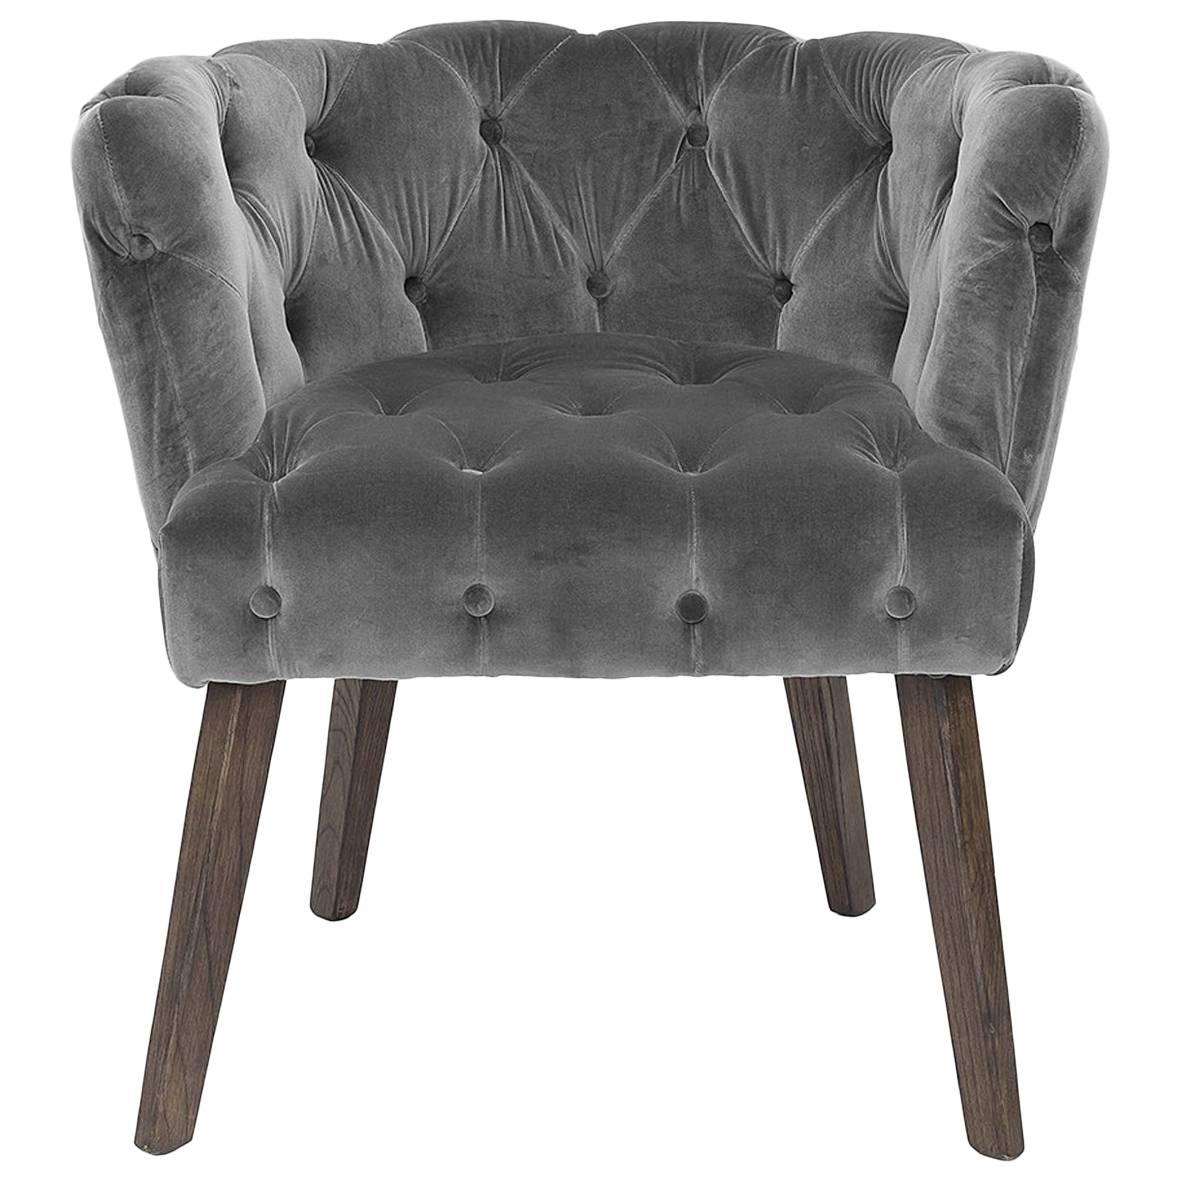 Home Capiton Chair in Grey, Purple or Black Velvet Fabric